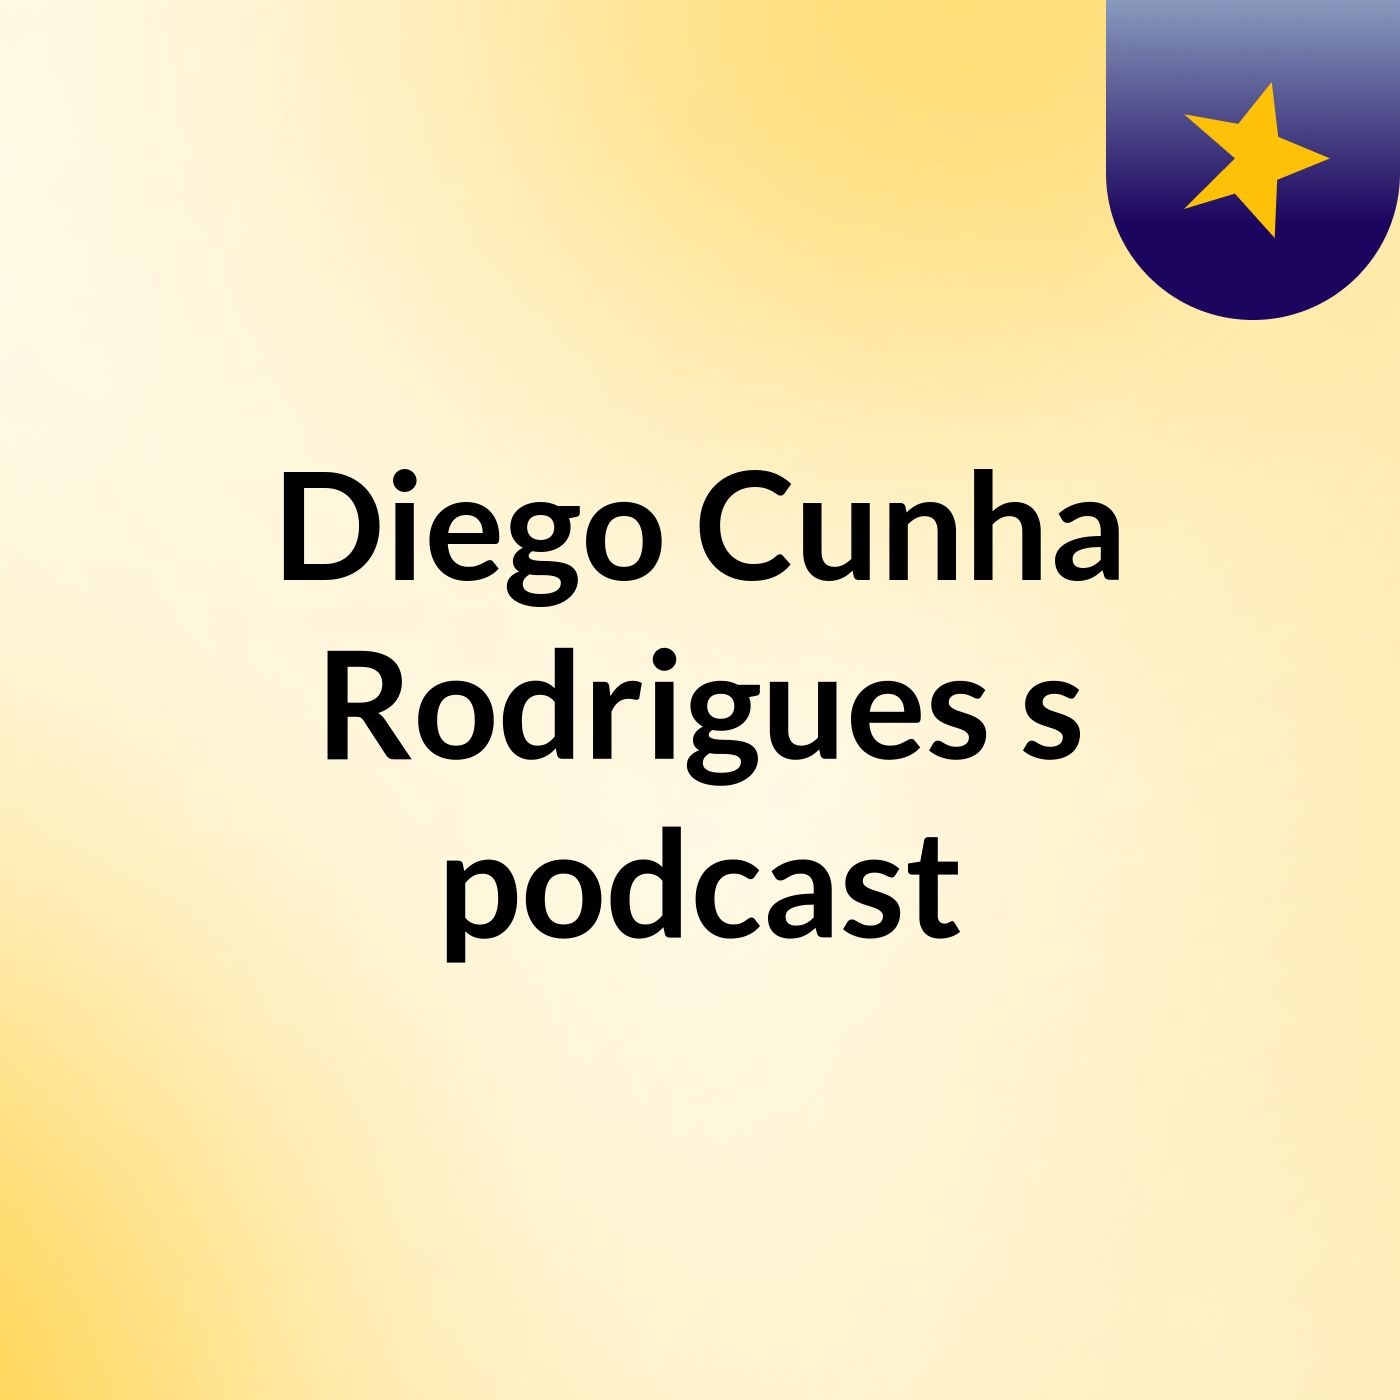 Diego Cunha Rodrigues's podcast